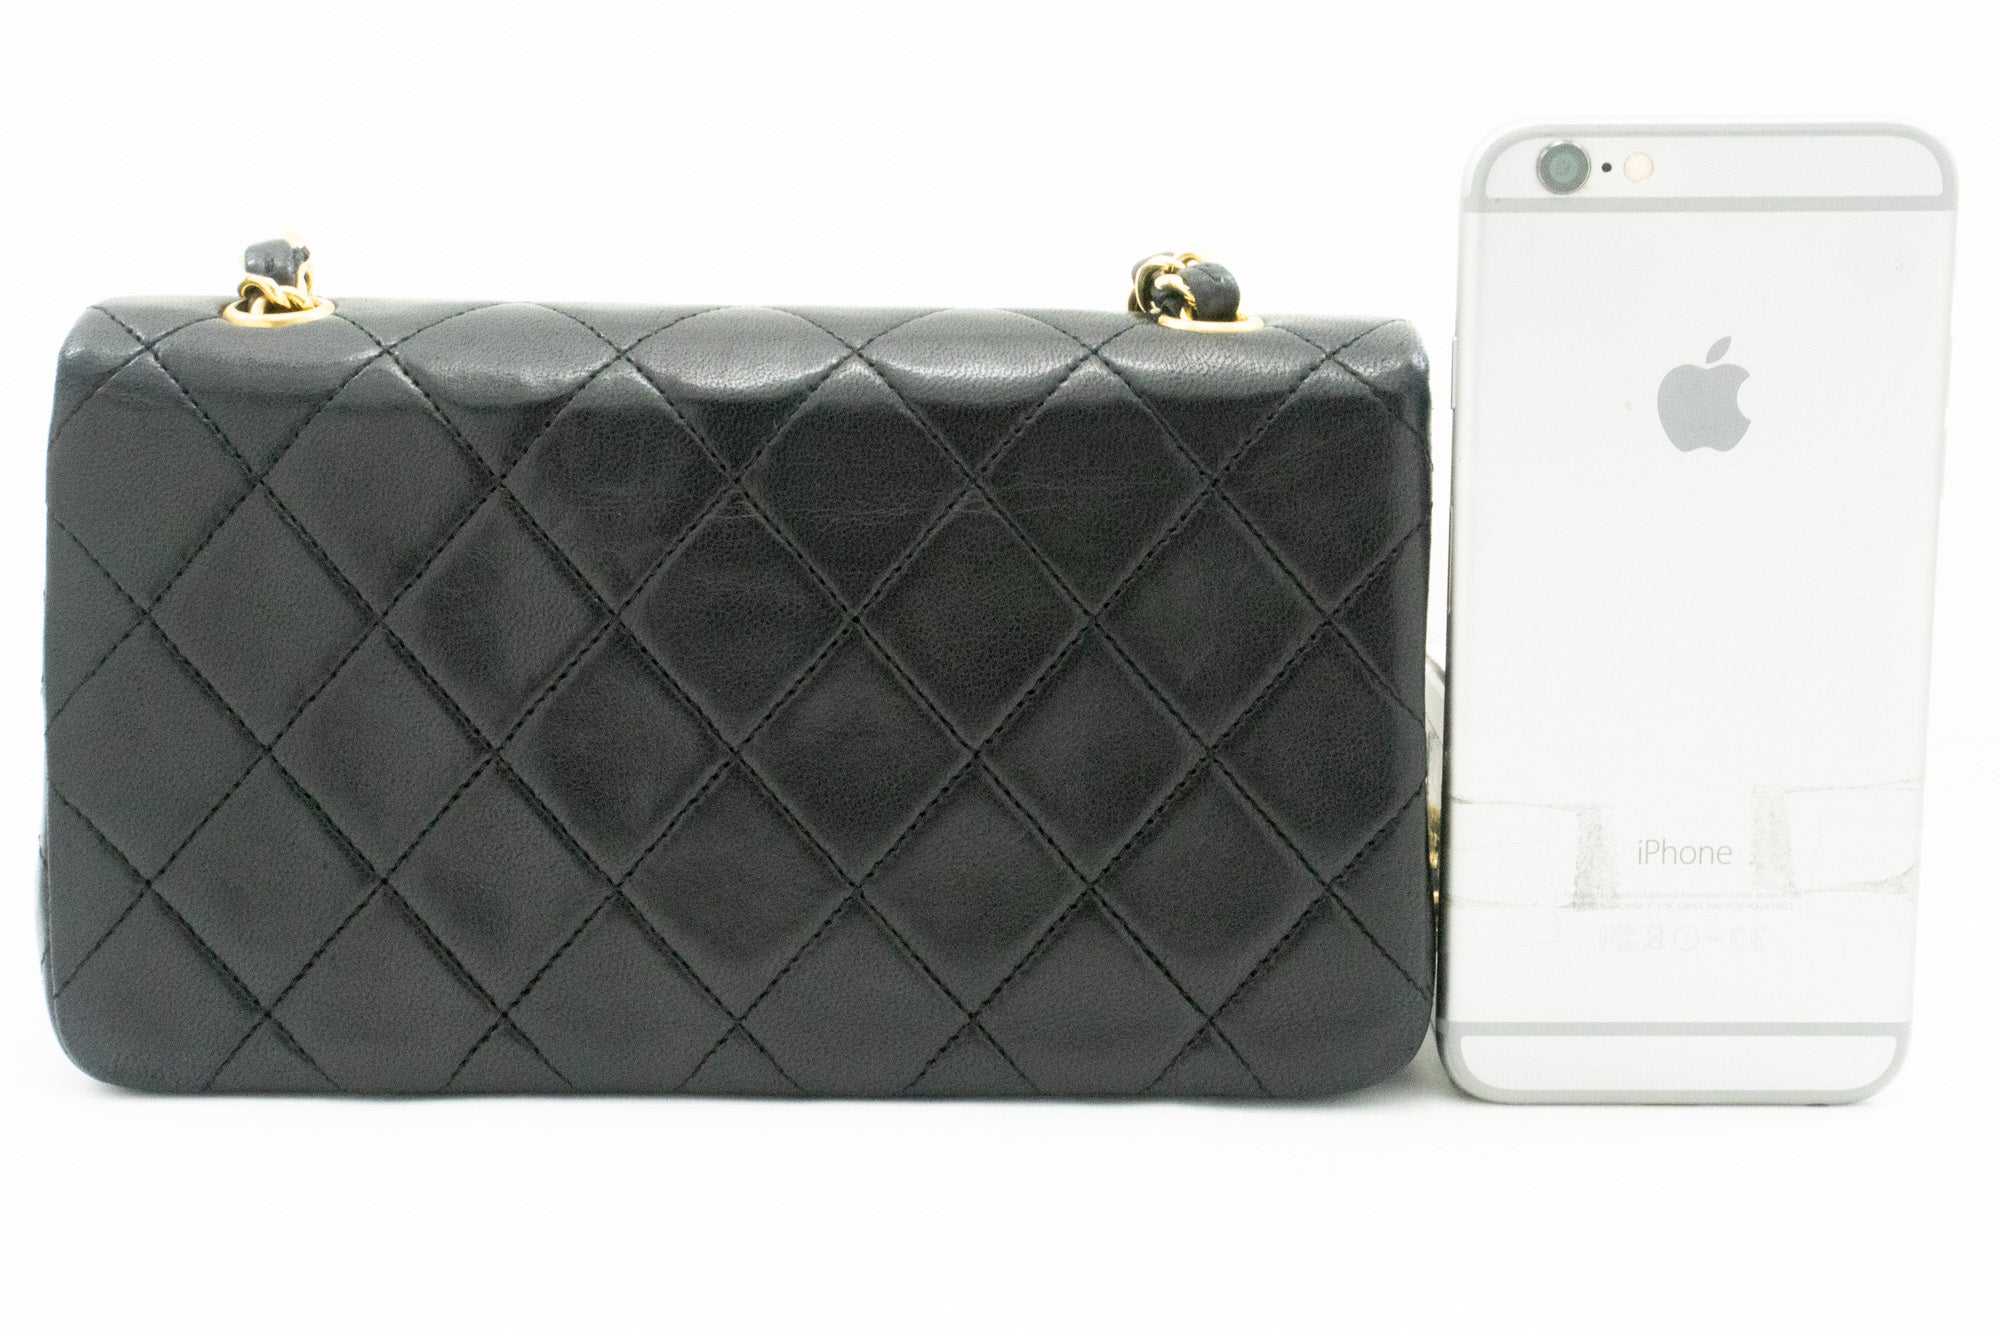 Chanel White Quilted Leather Vintage Full Flap Bag Chanel